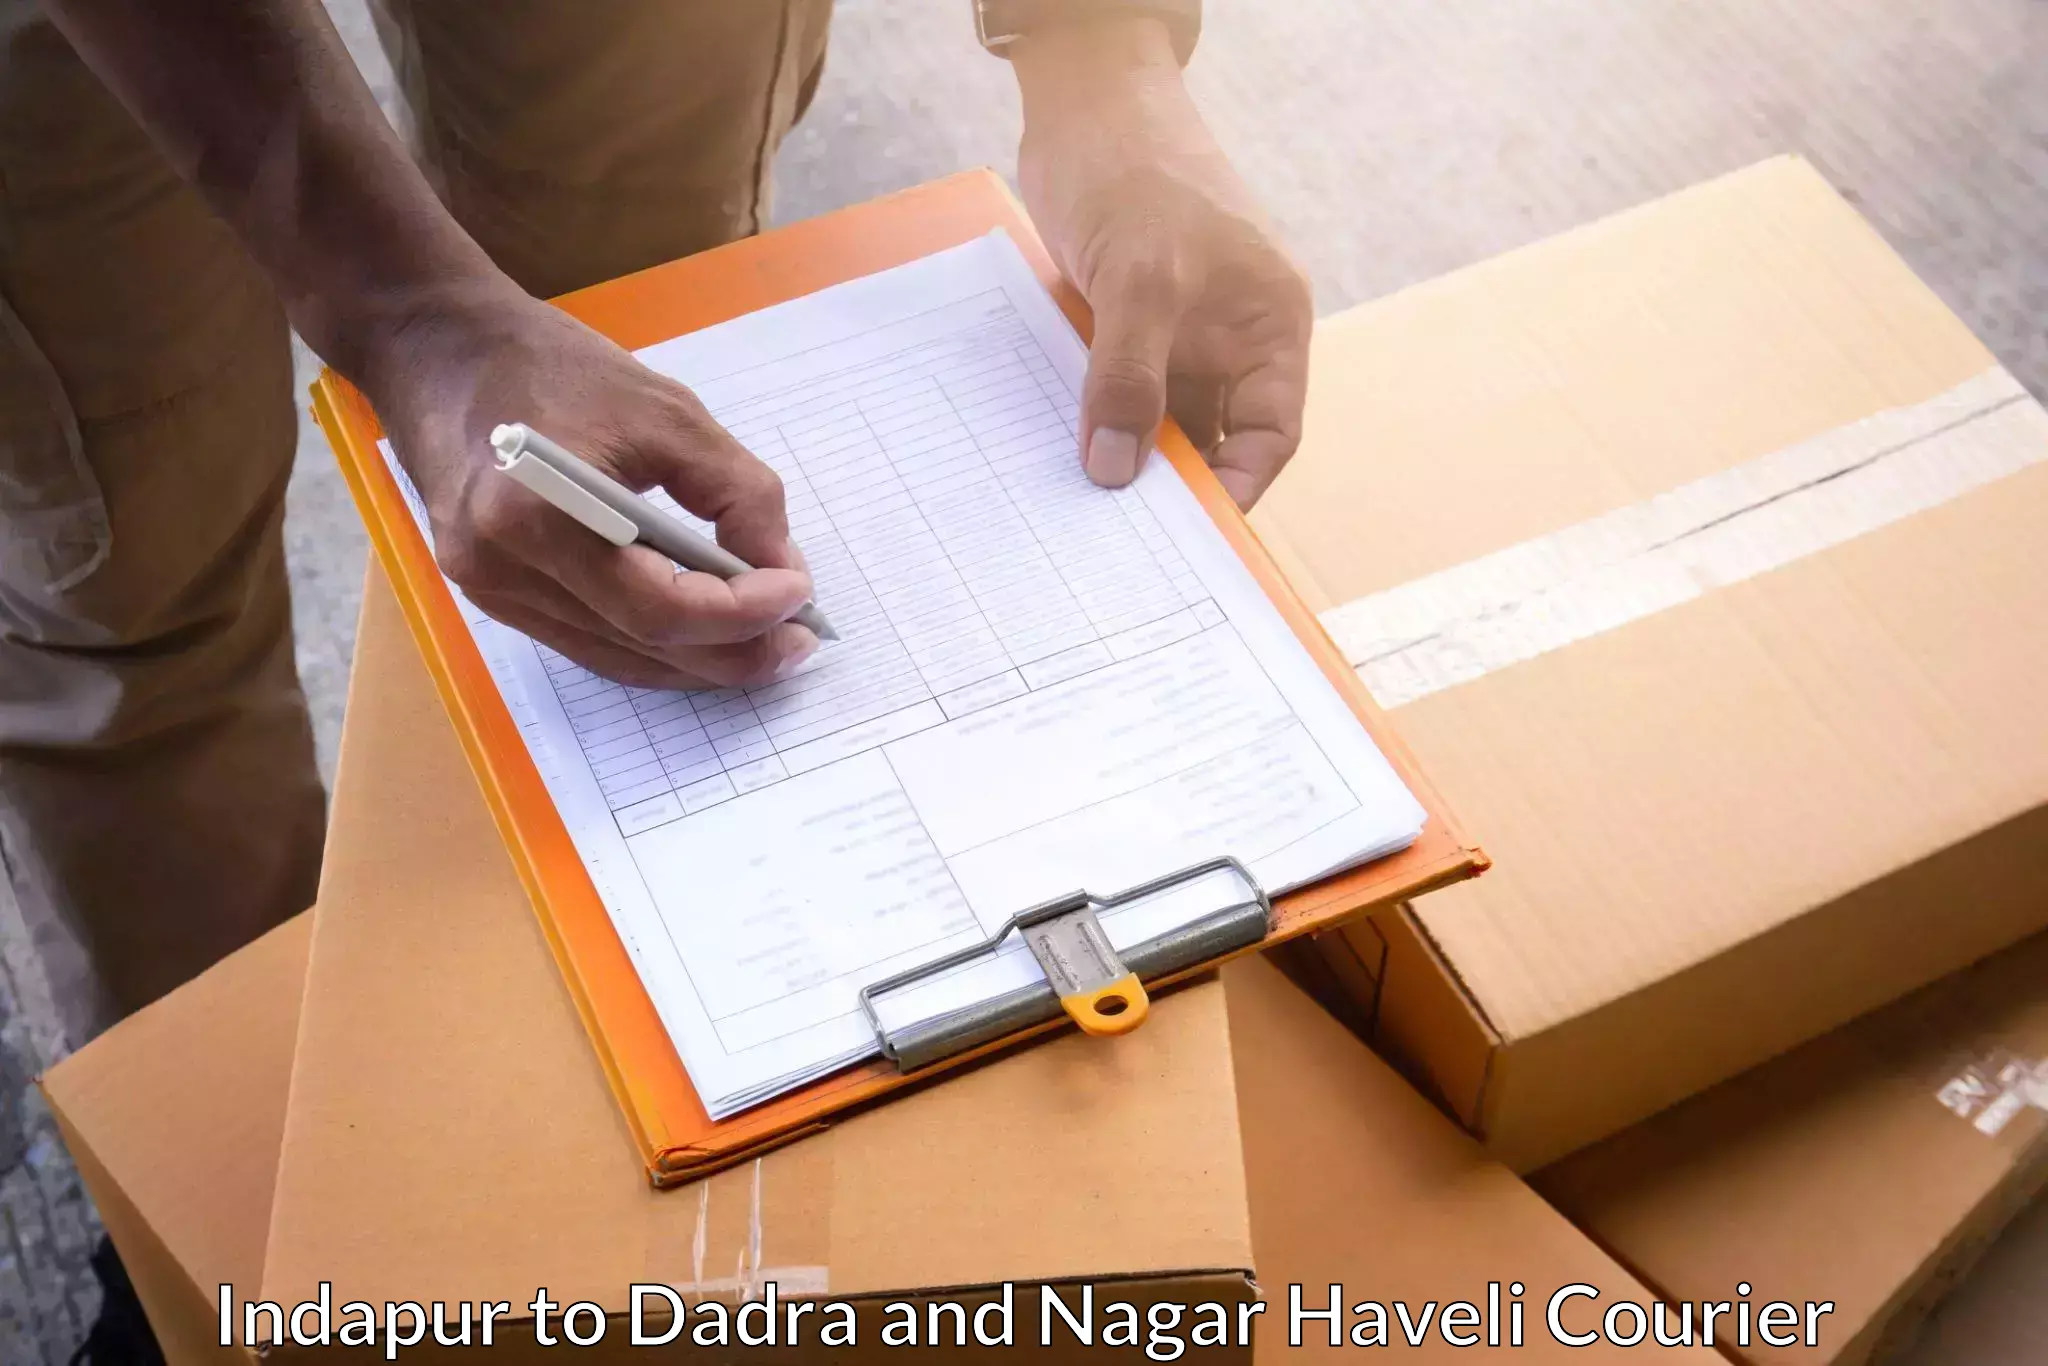 Dynamic courier operations Indapur to Dadra and Nagar Haveli